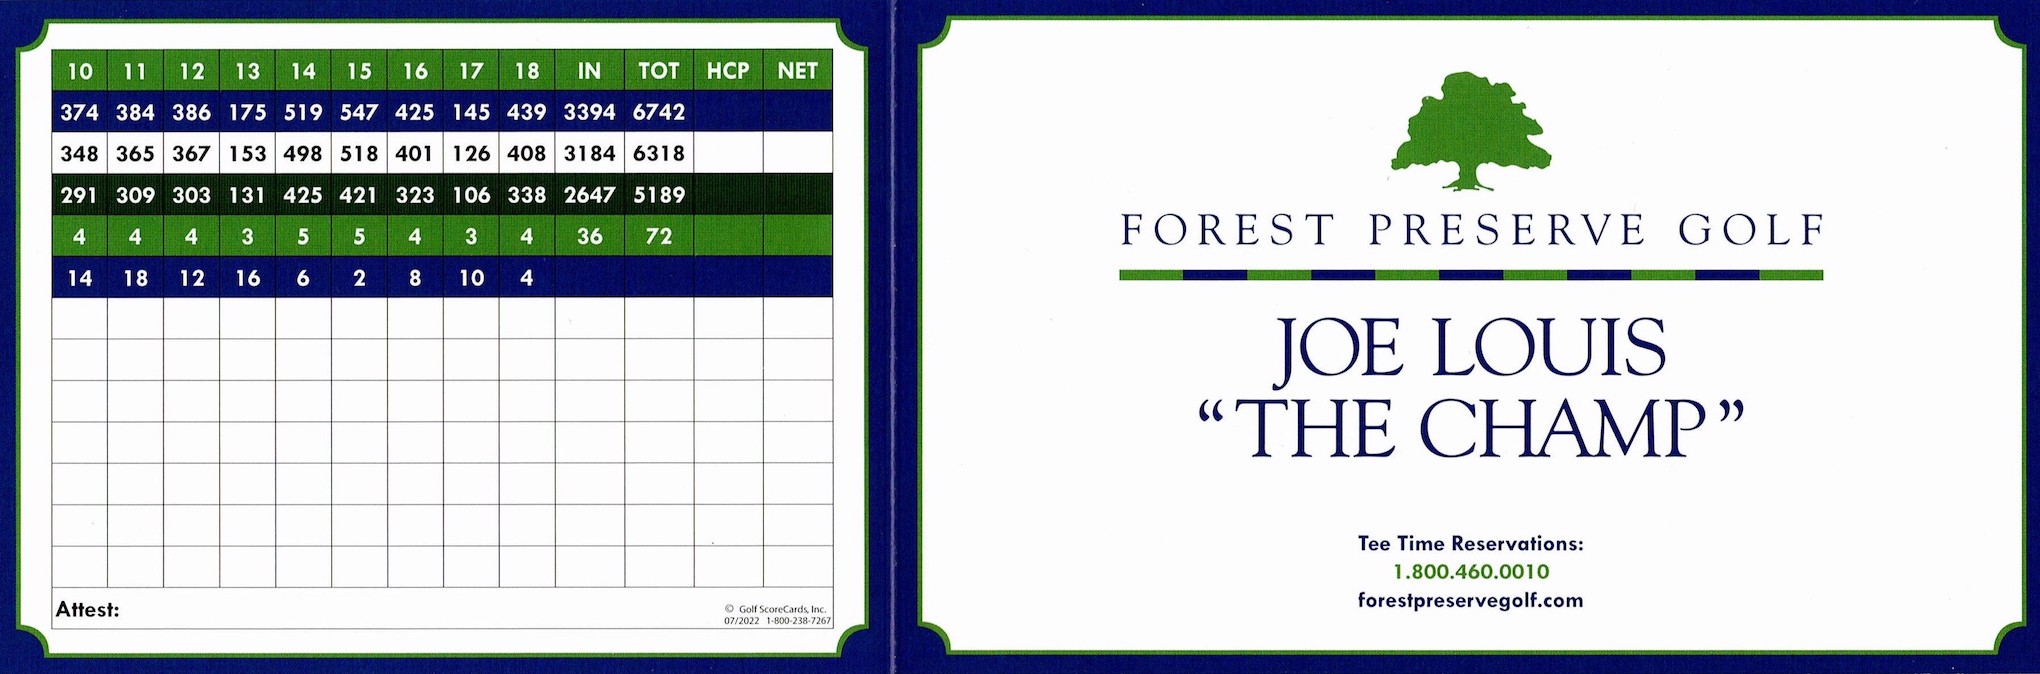 Scan of the scorecard from Joe Louis “The Champ” Golf Course in Riverdale, Illinois. 